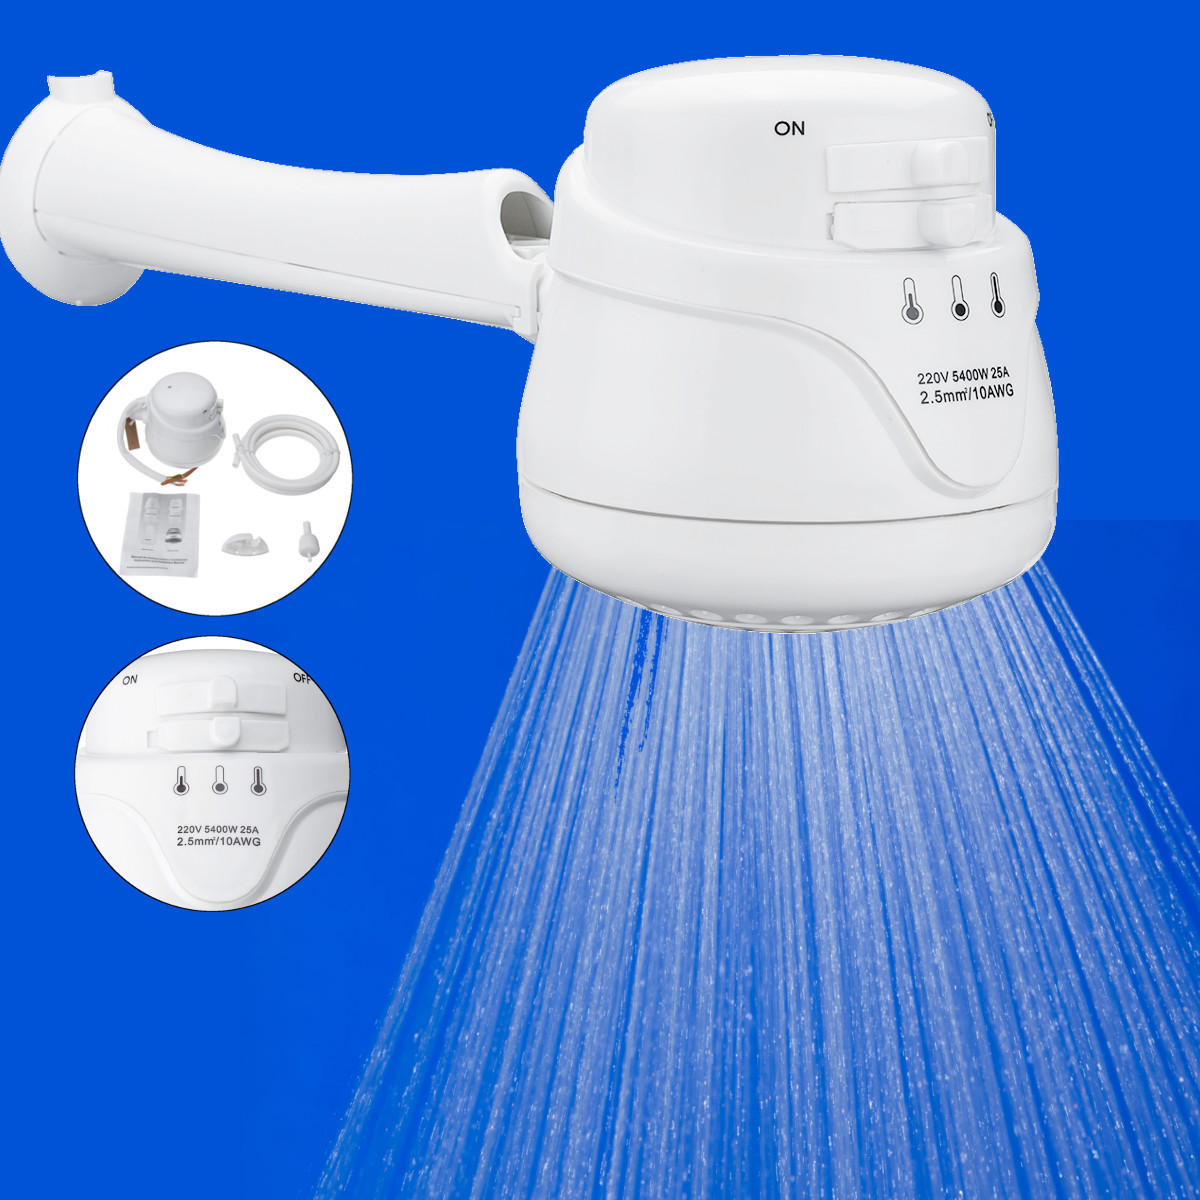 110v/220v 5400w electric shower head instant hot water heater tankless